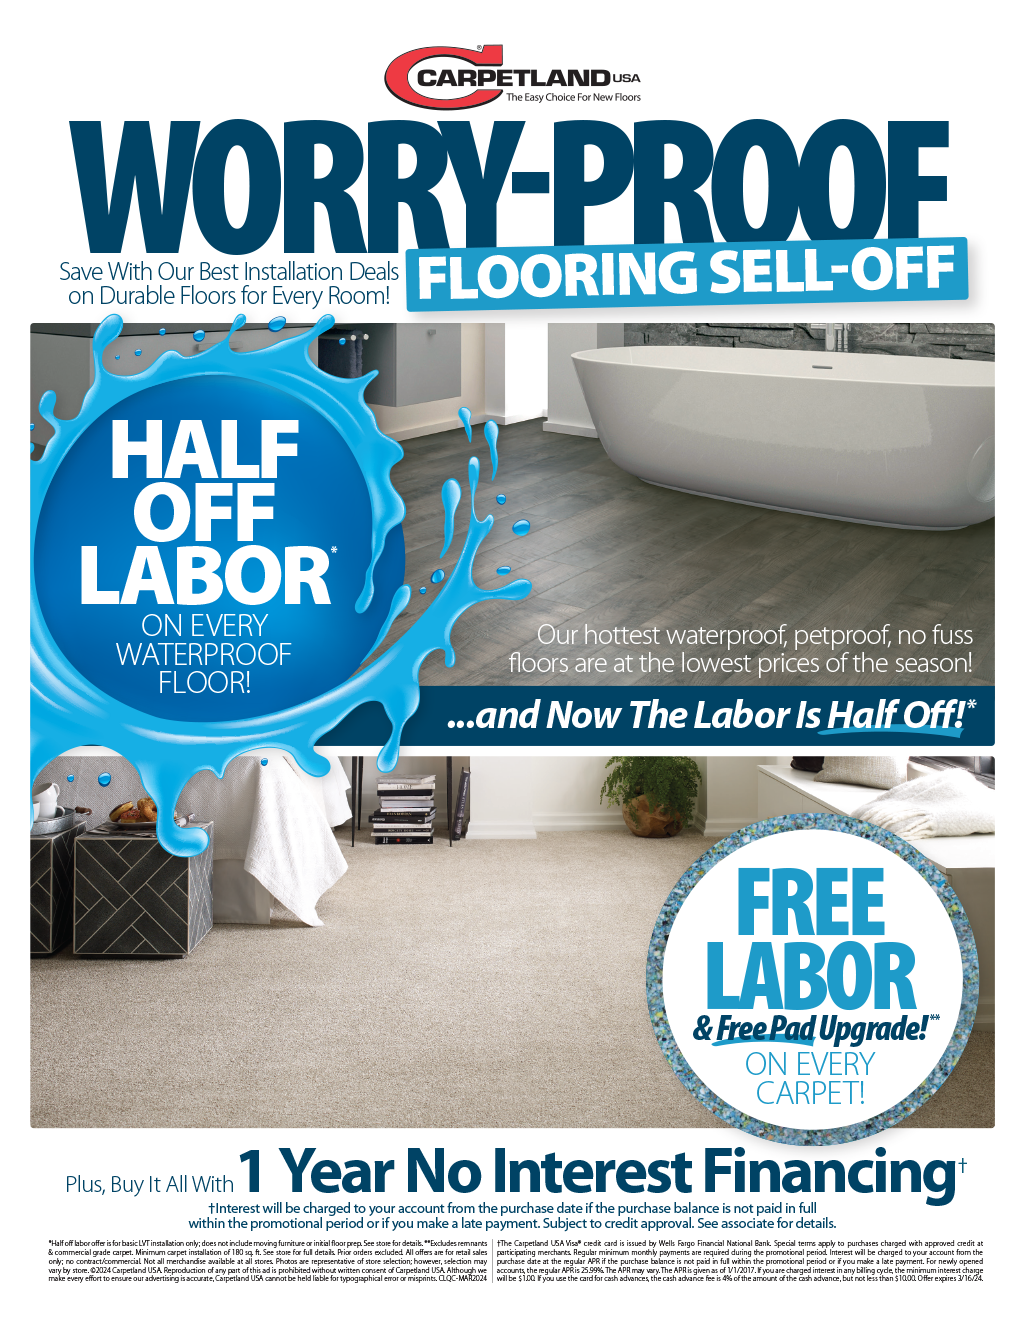 Worry-Proof Flooring Sell-Off!